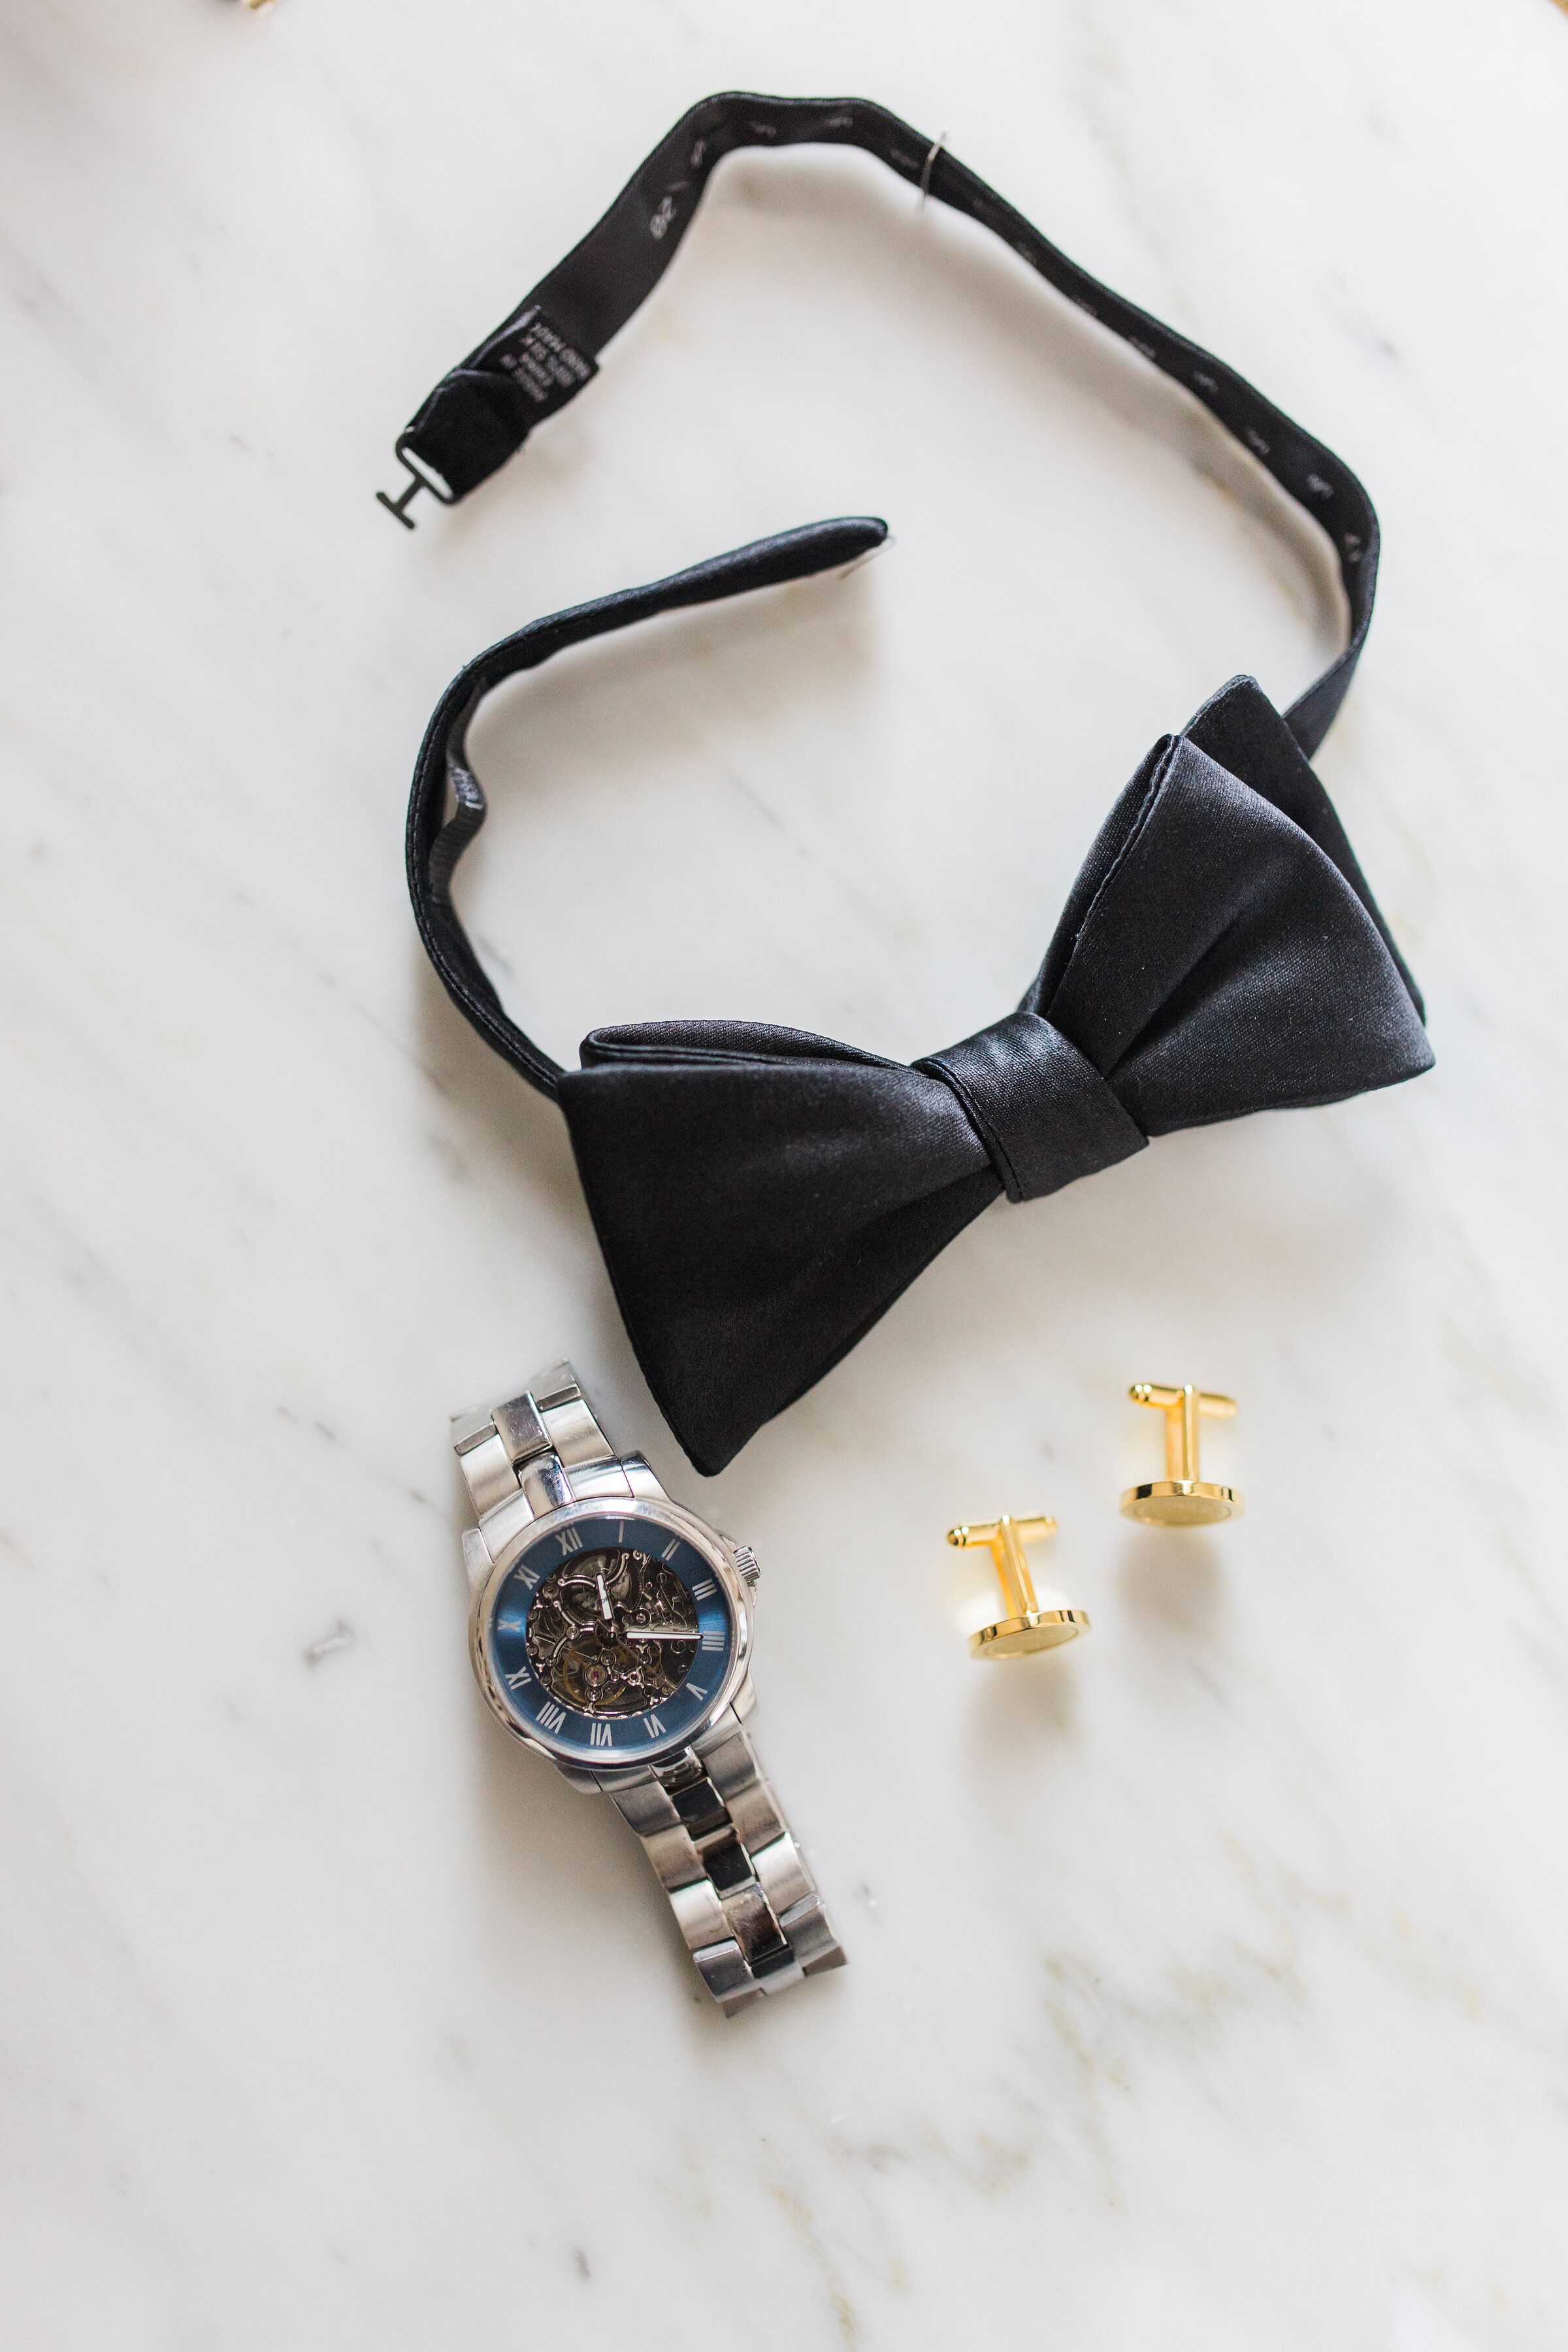 Classic Black-Tie Accessories as Groom's Gift